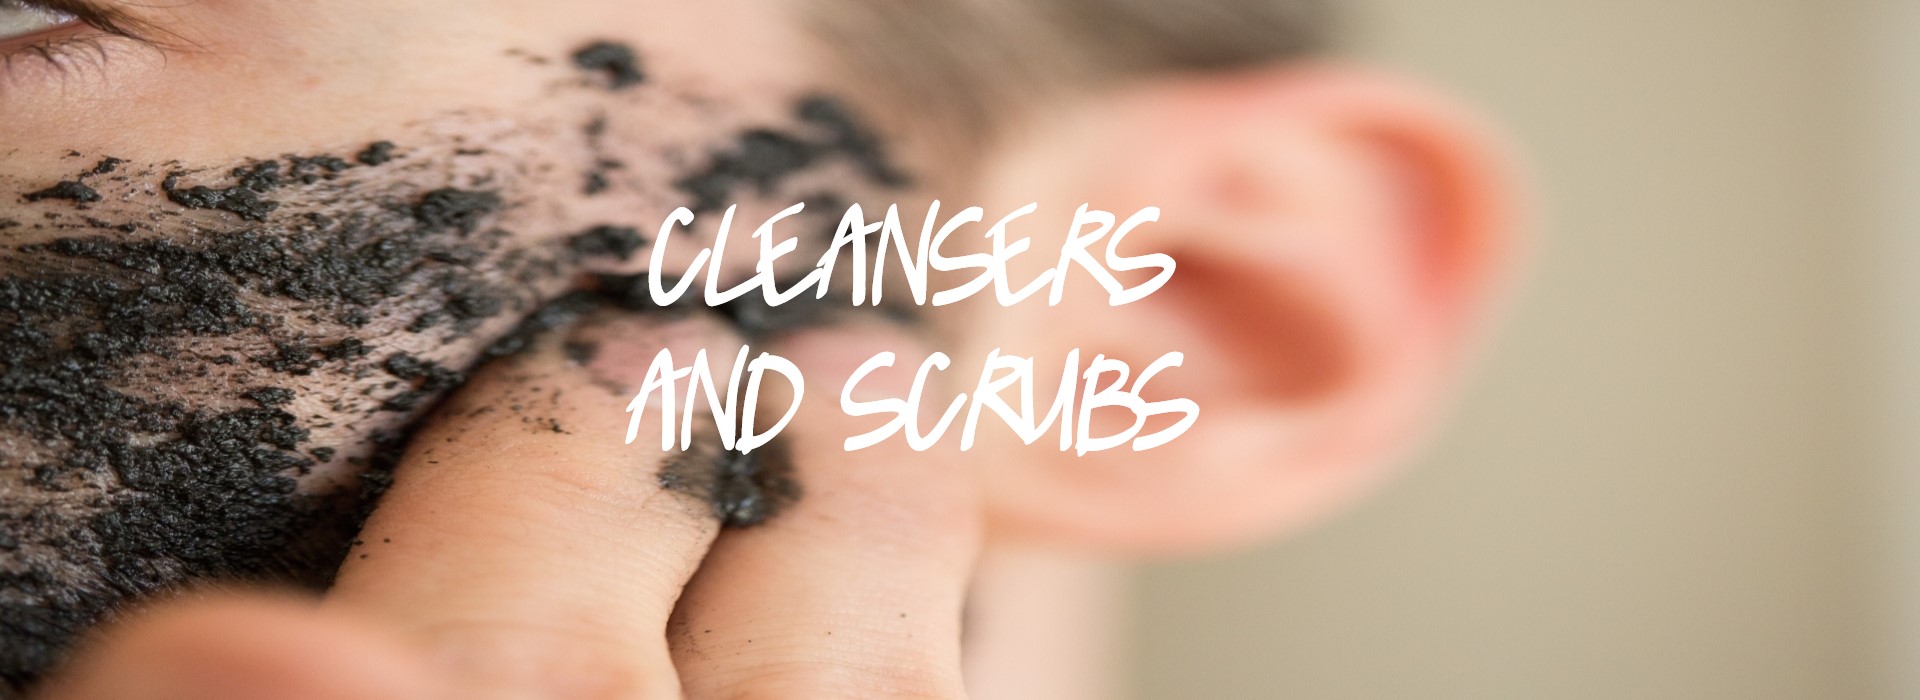 Cleansers and Scrubs